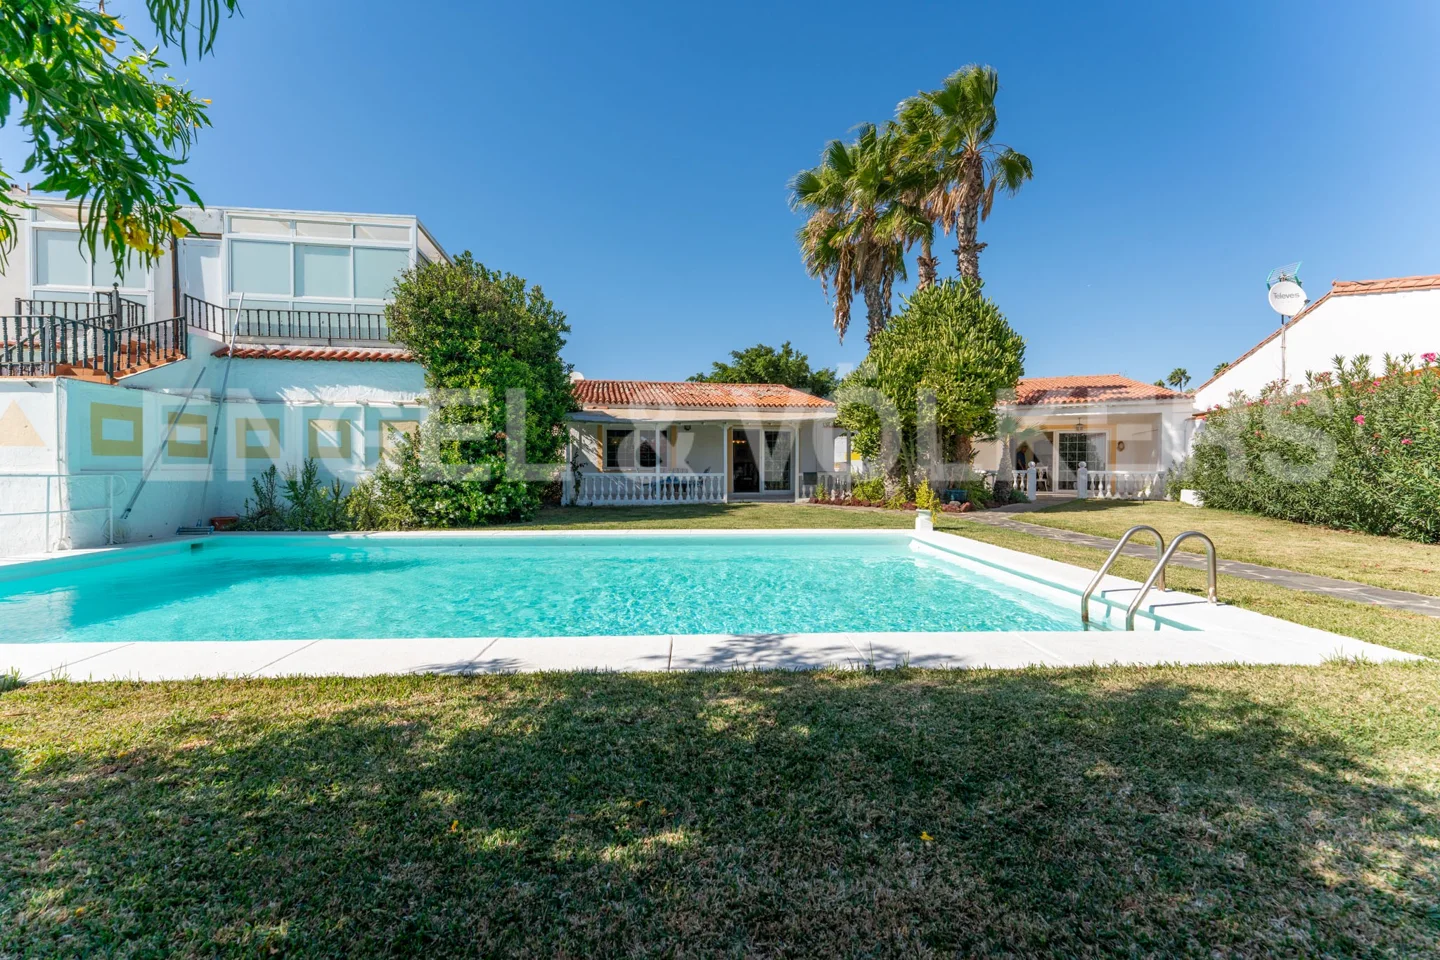 A treasure of Playa del Inglés: two Villas, two Bungalows and a beautiful garden with swimming pool.